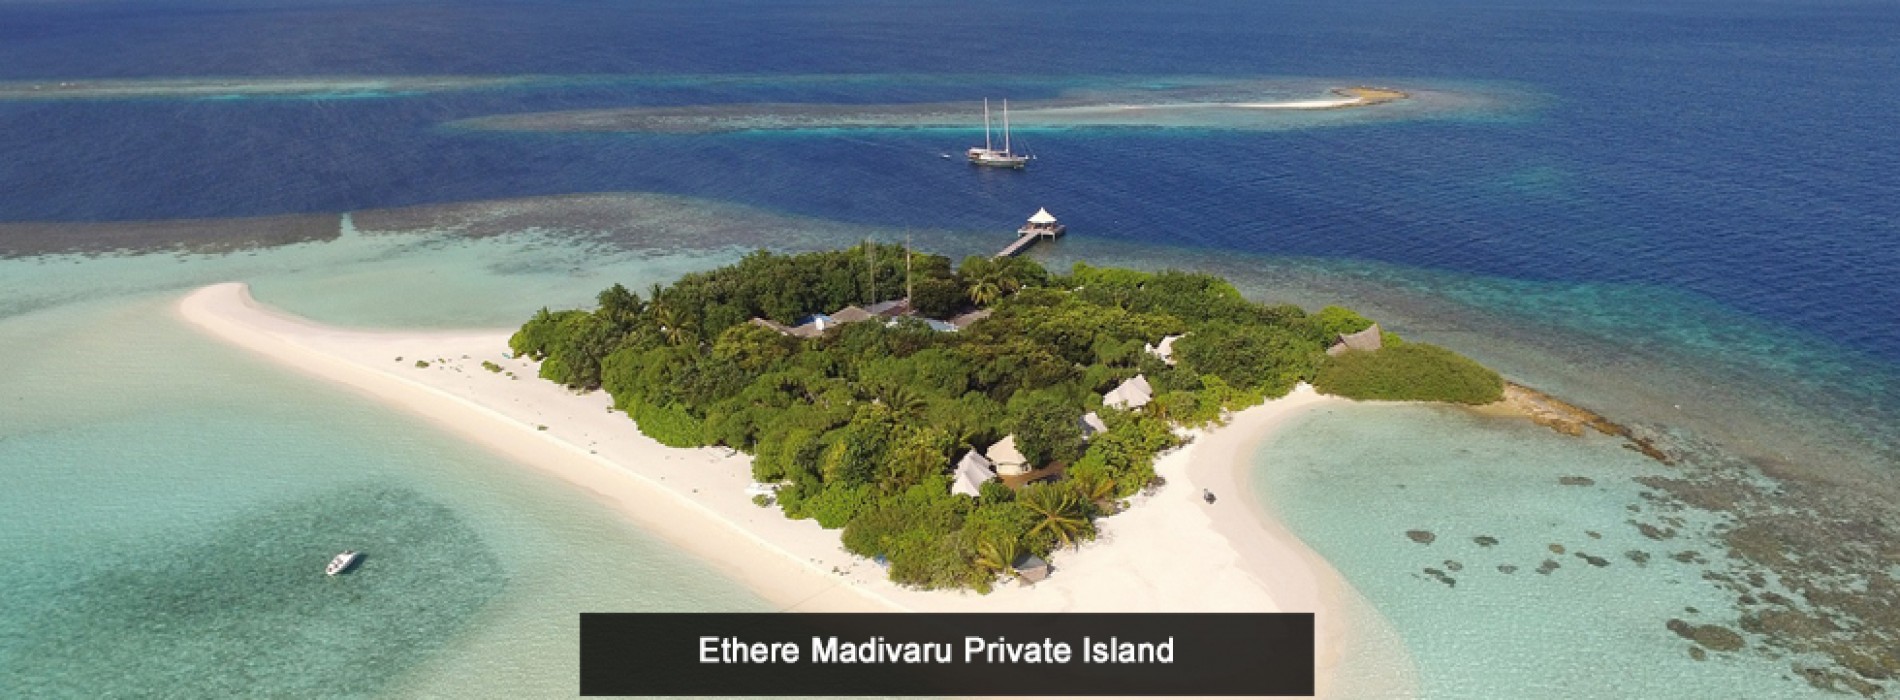 Emaar Hospitality Group expands to South Asia with ‘Address Madivaru Maldives Resort + Spa’